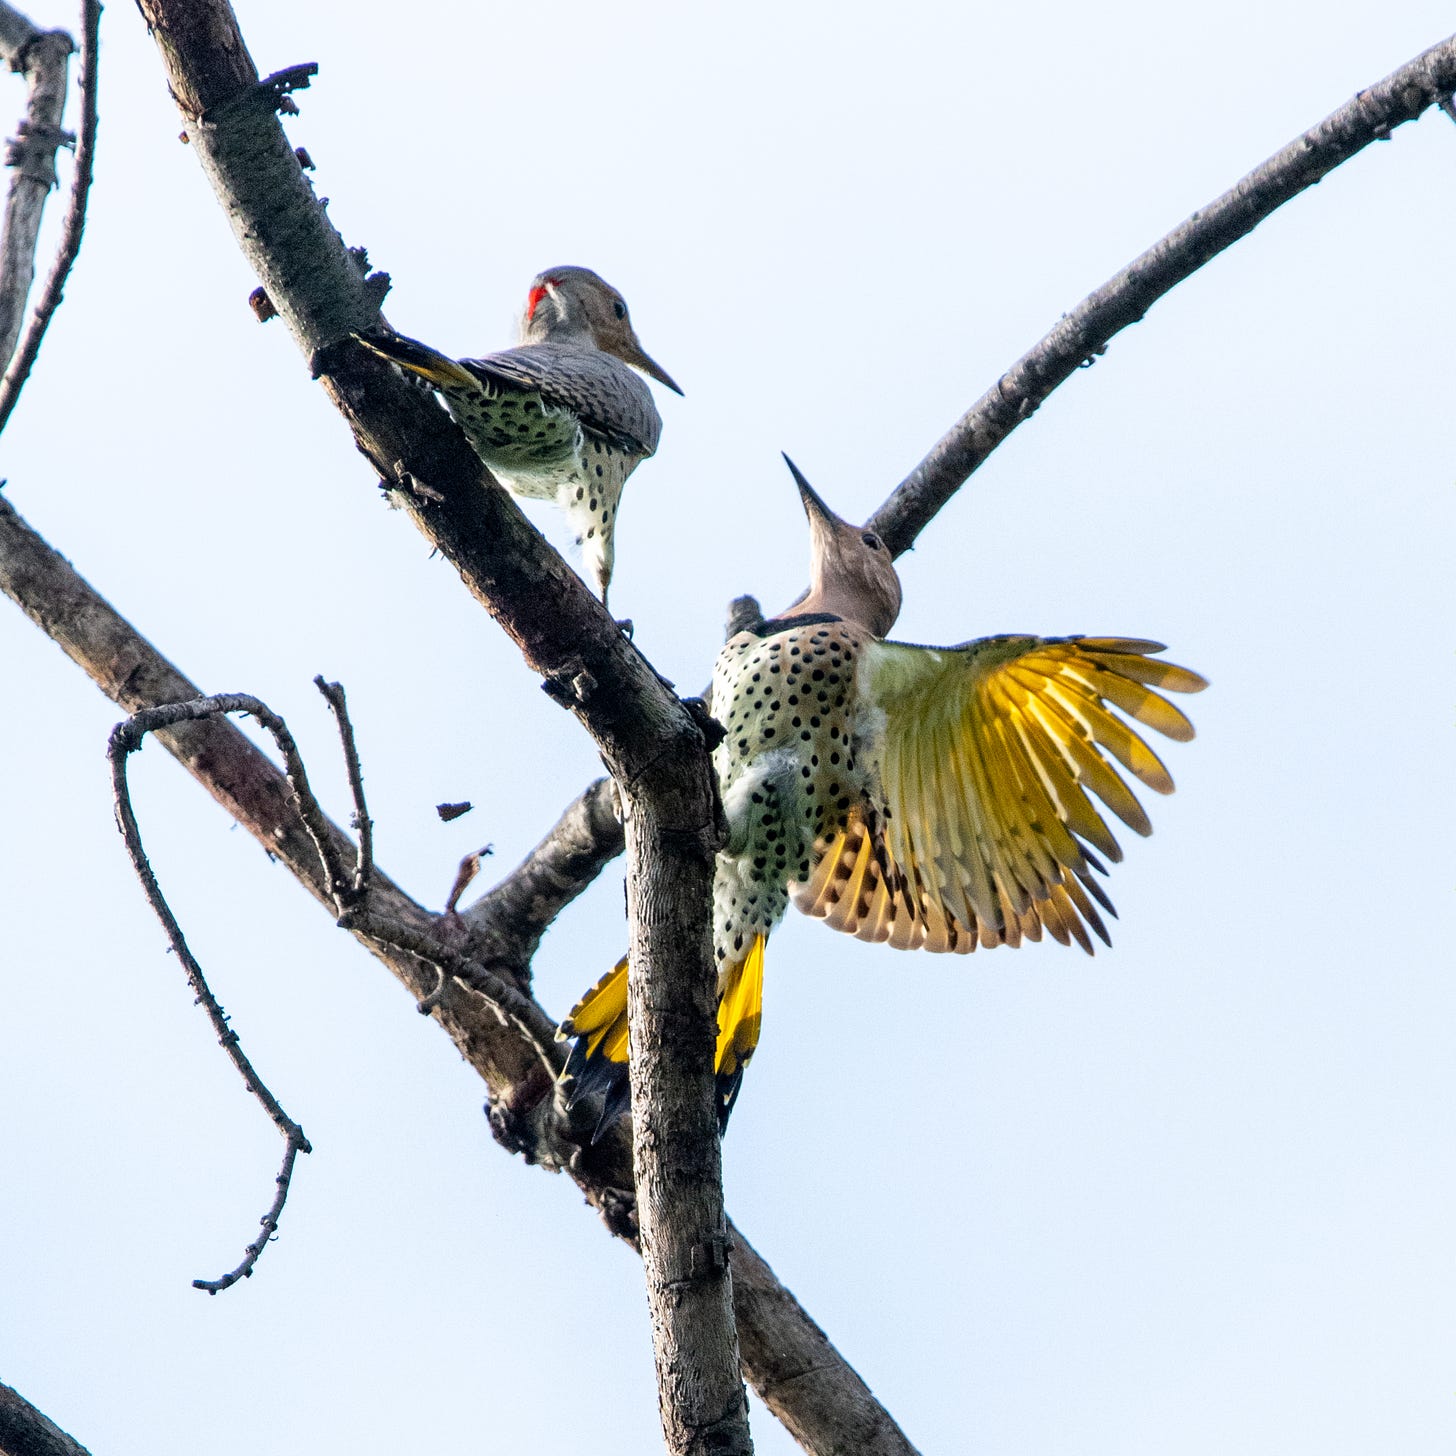 Two Northern flickers face off in bare tree branches, the one above drawing back while the one below flashes its wings